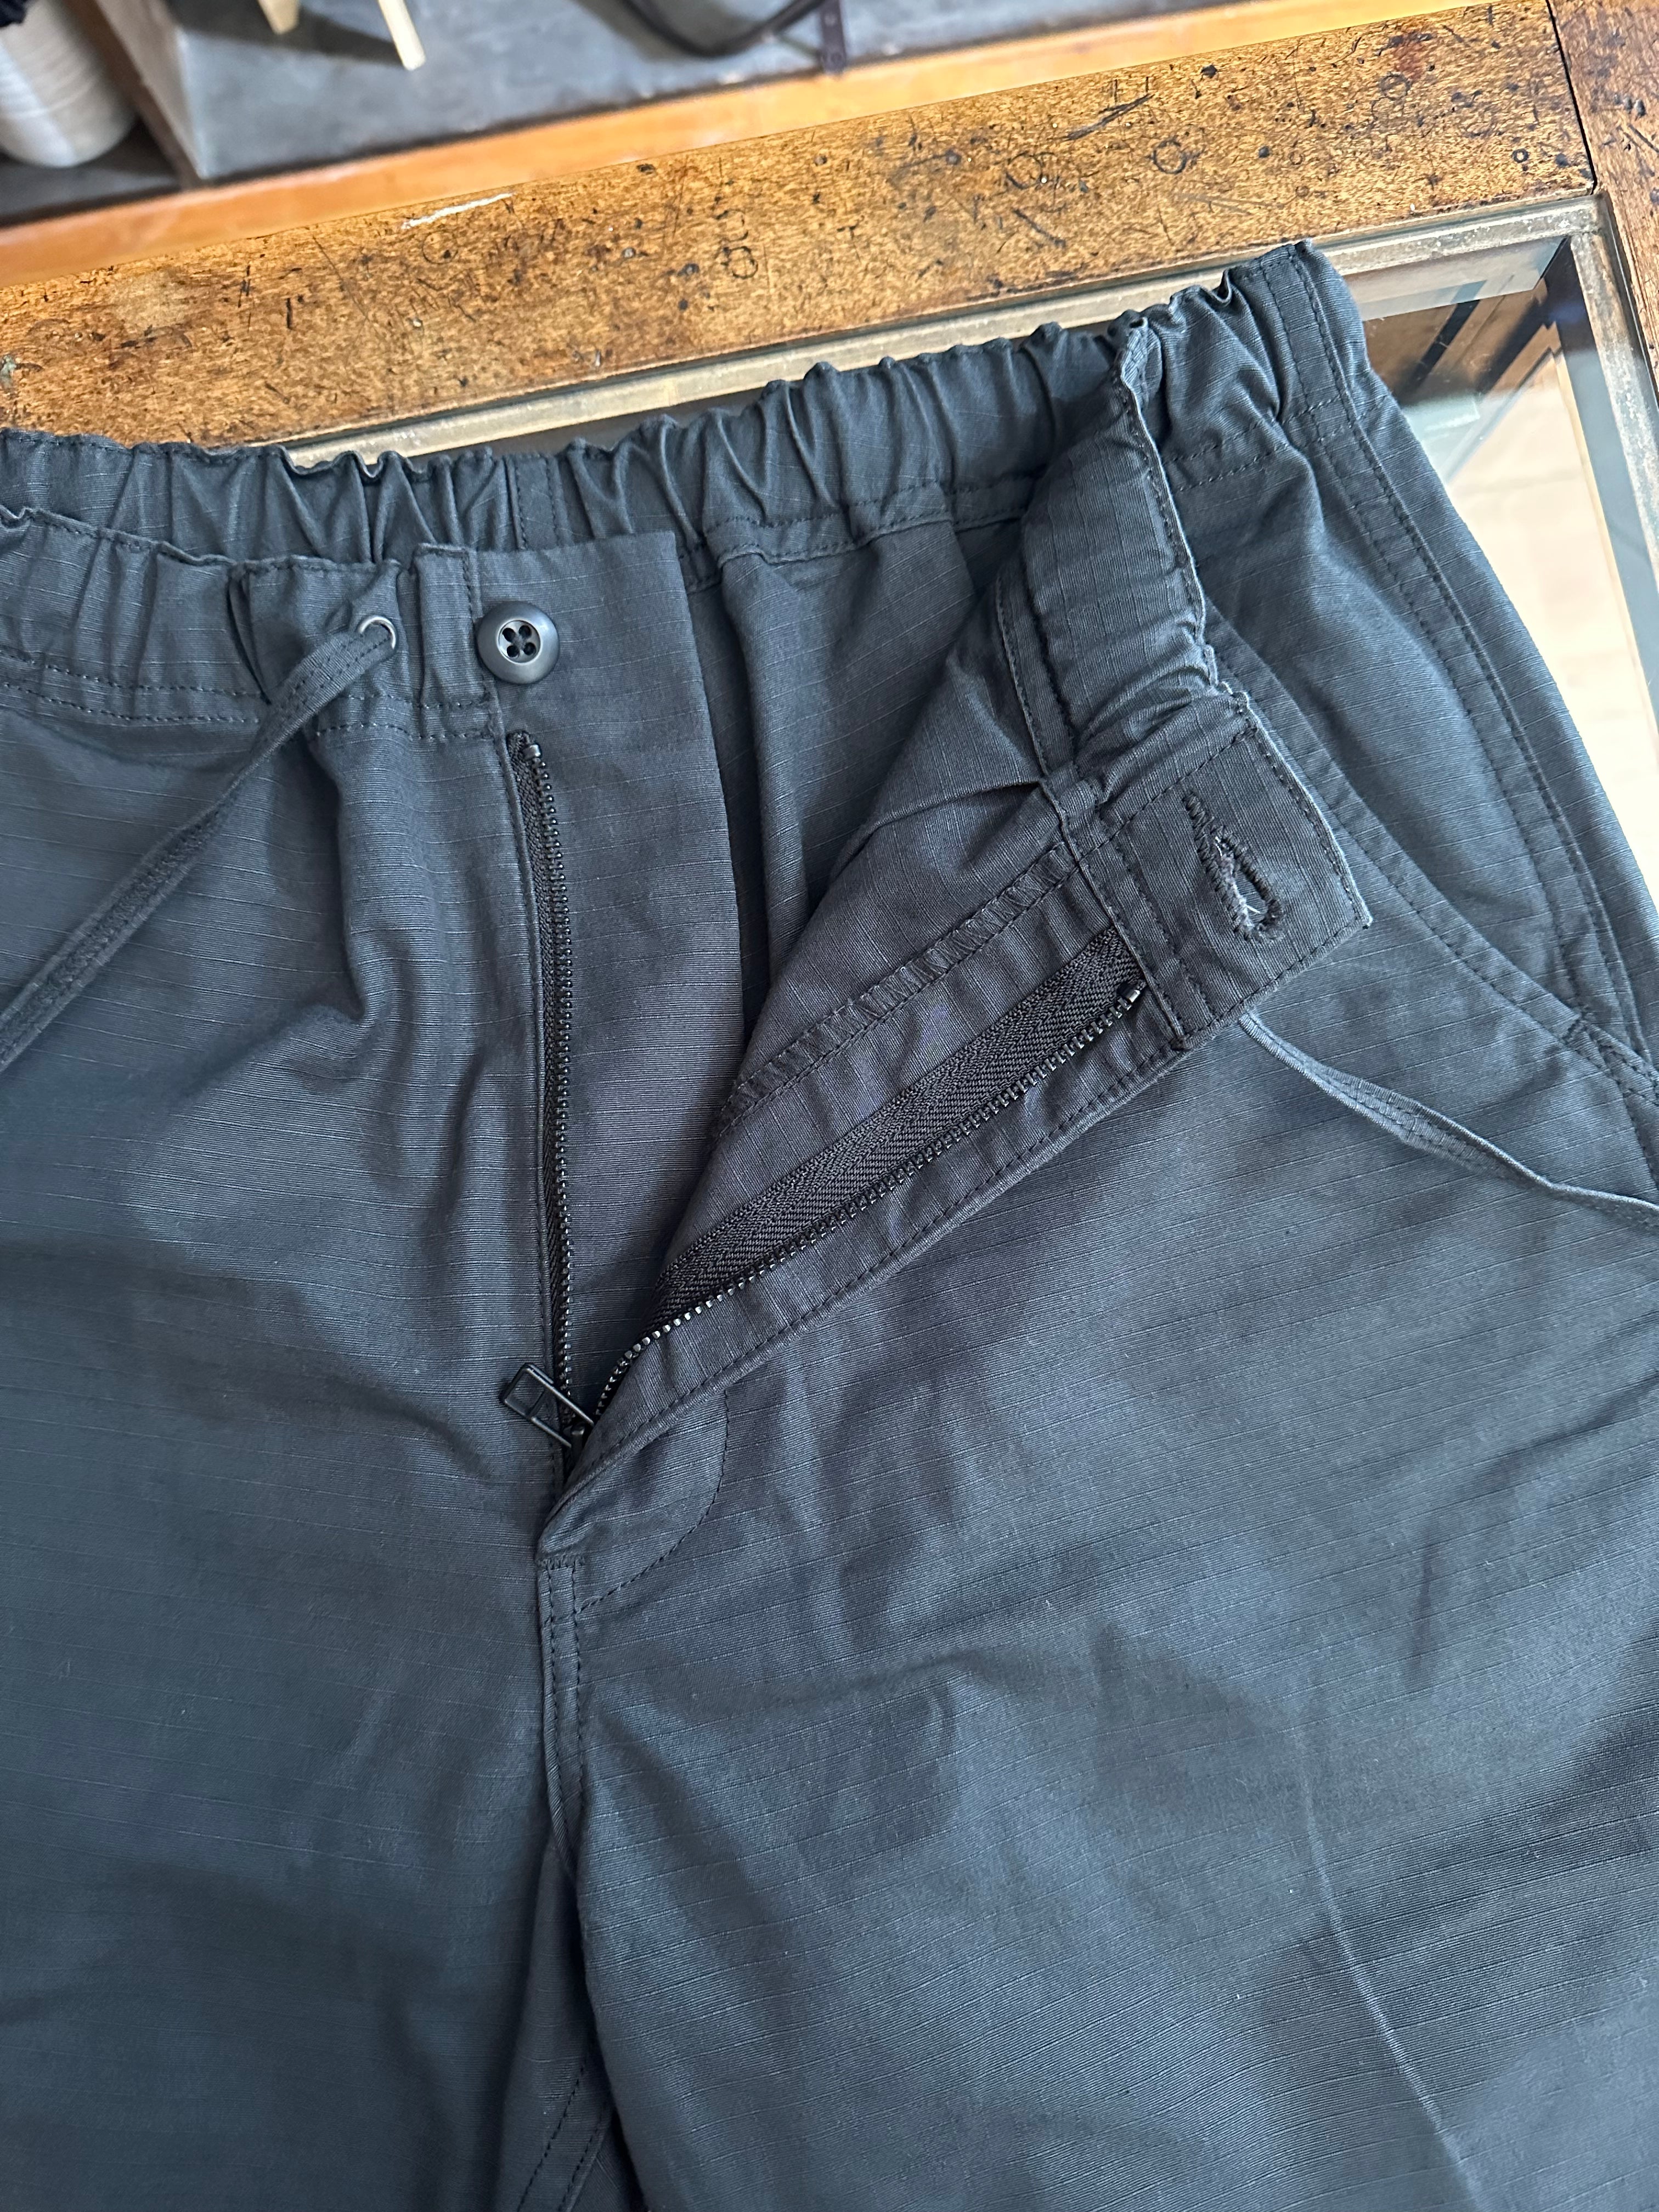 Gently Used orSlow New Yorker Shorts - Sumi Black Ripstop - 1